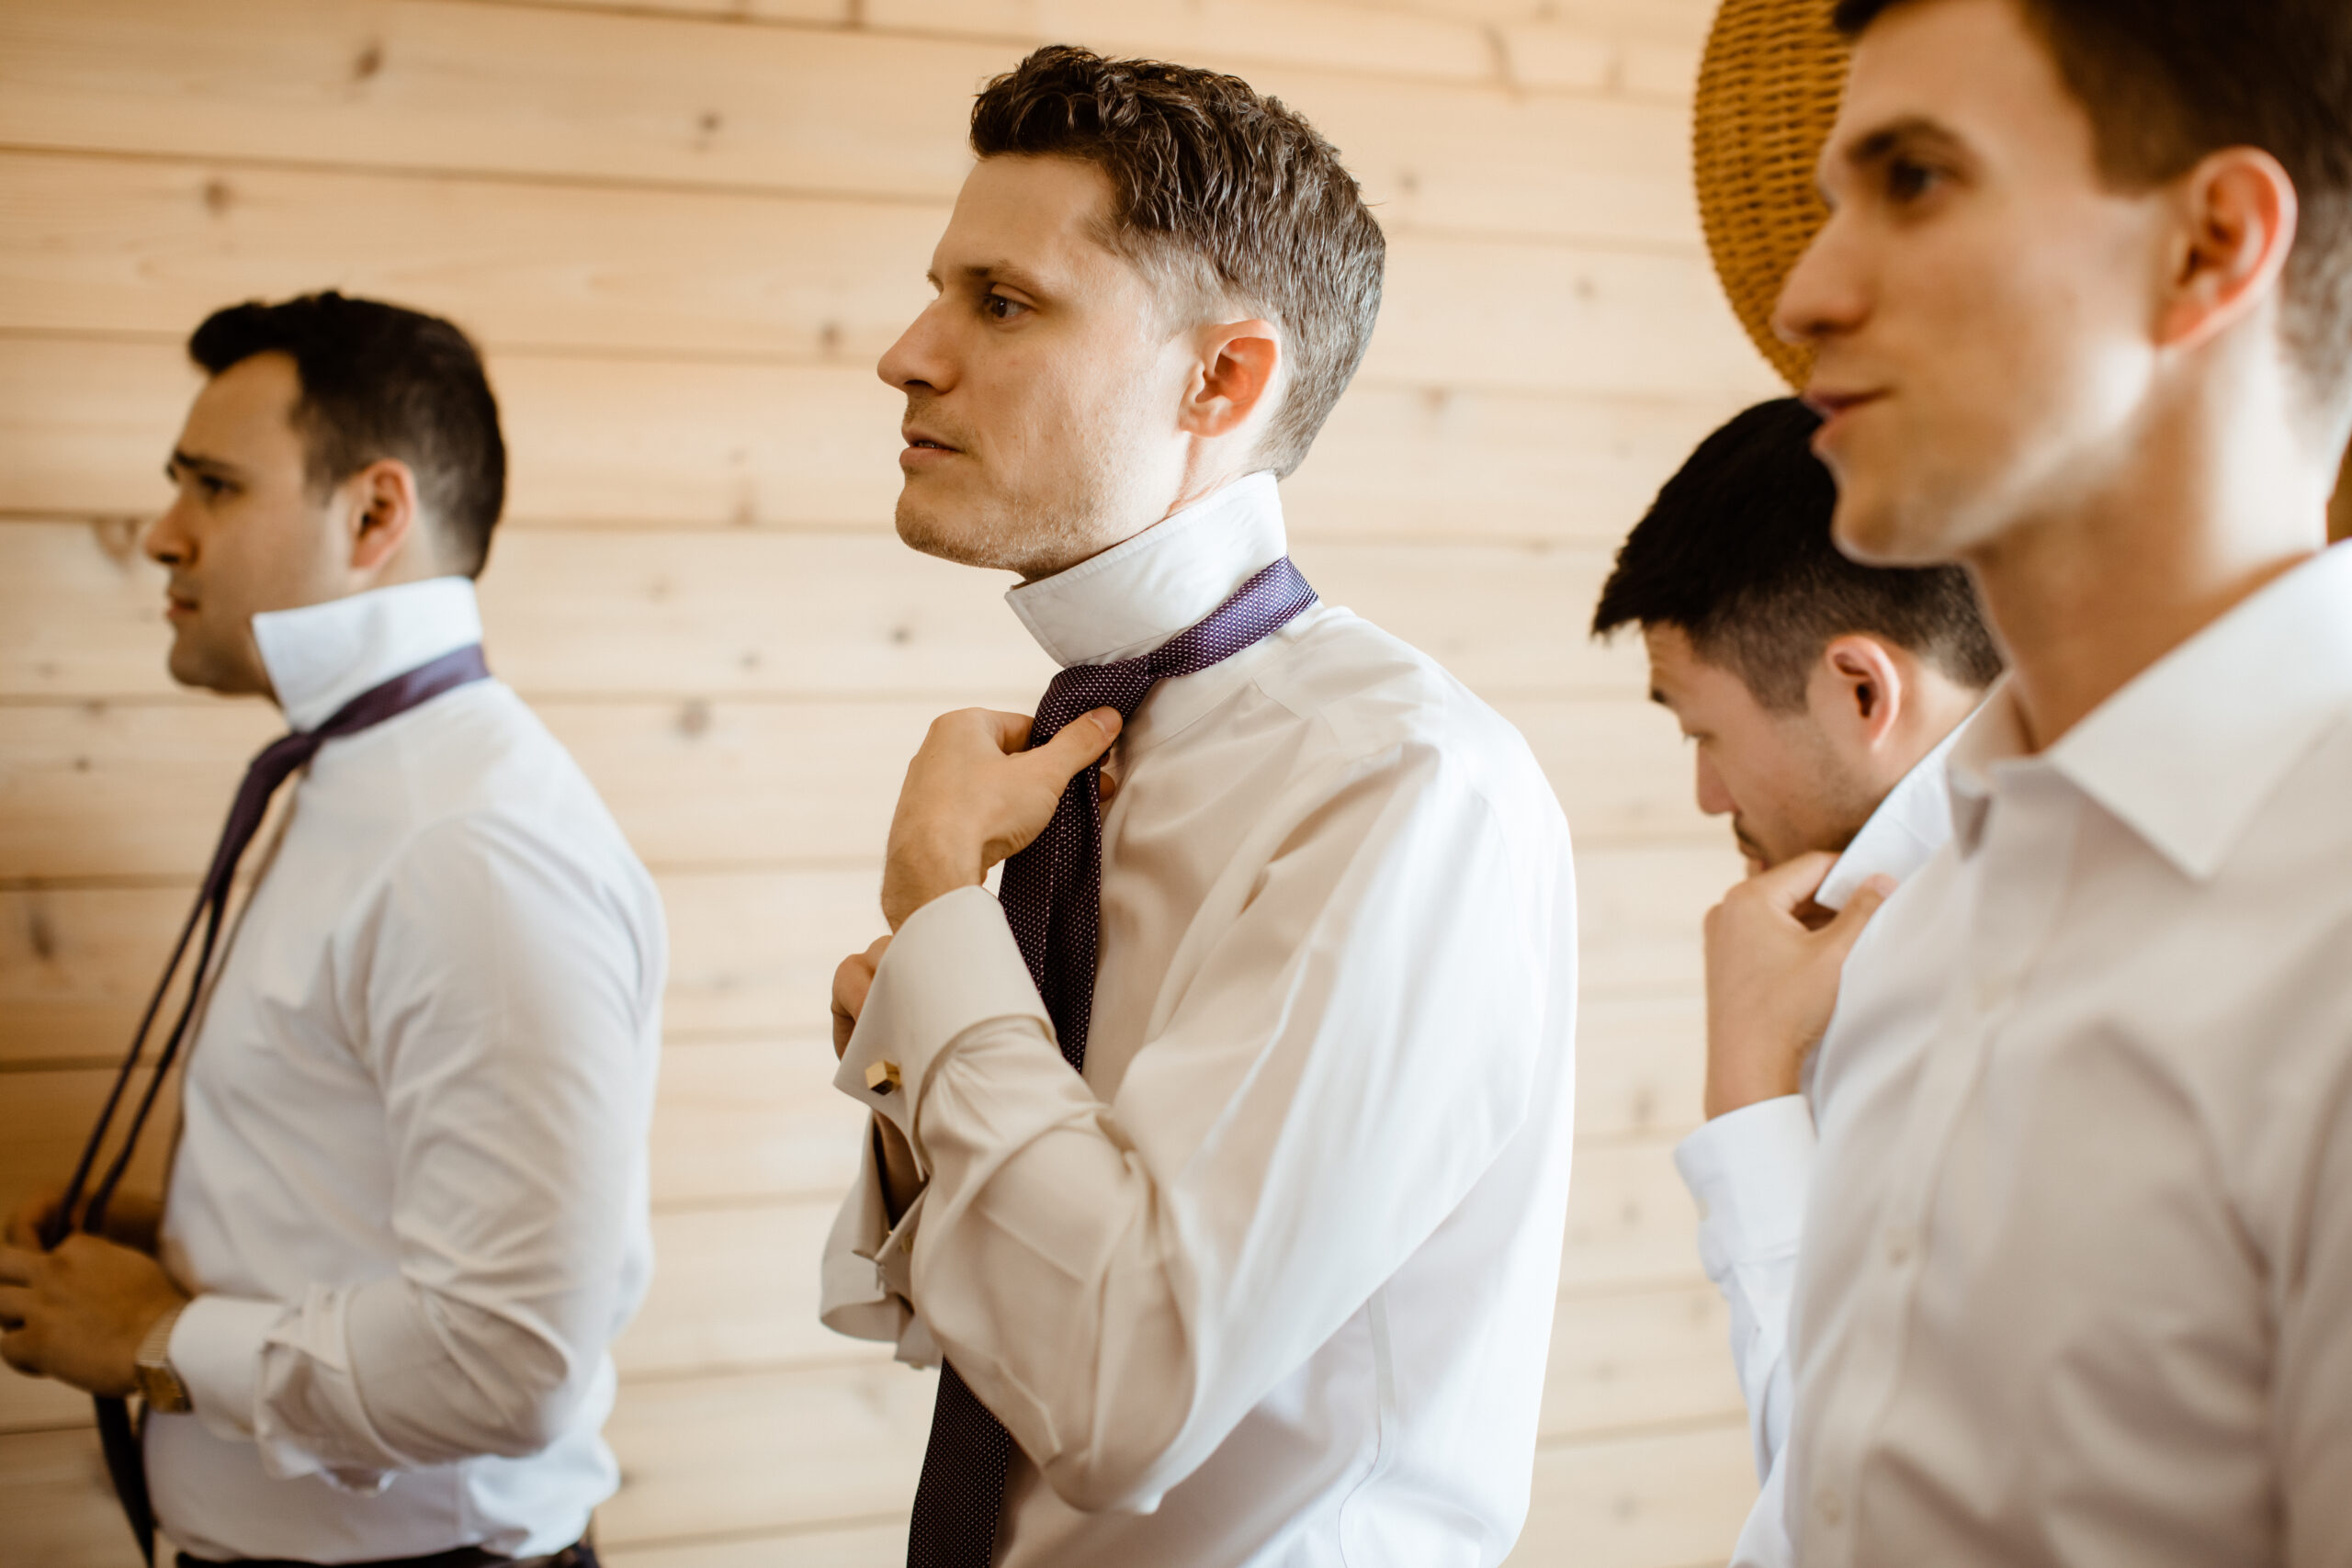 Groomsmen finish getting ready before the big day!